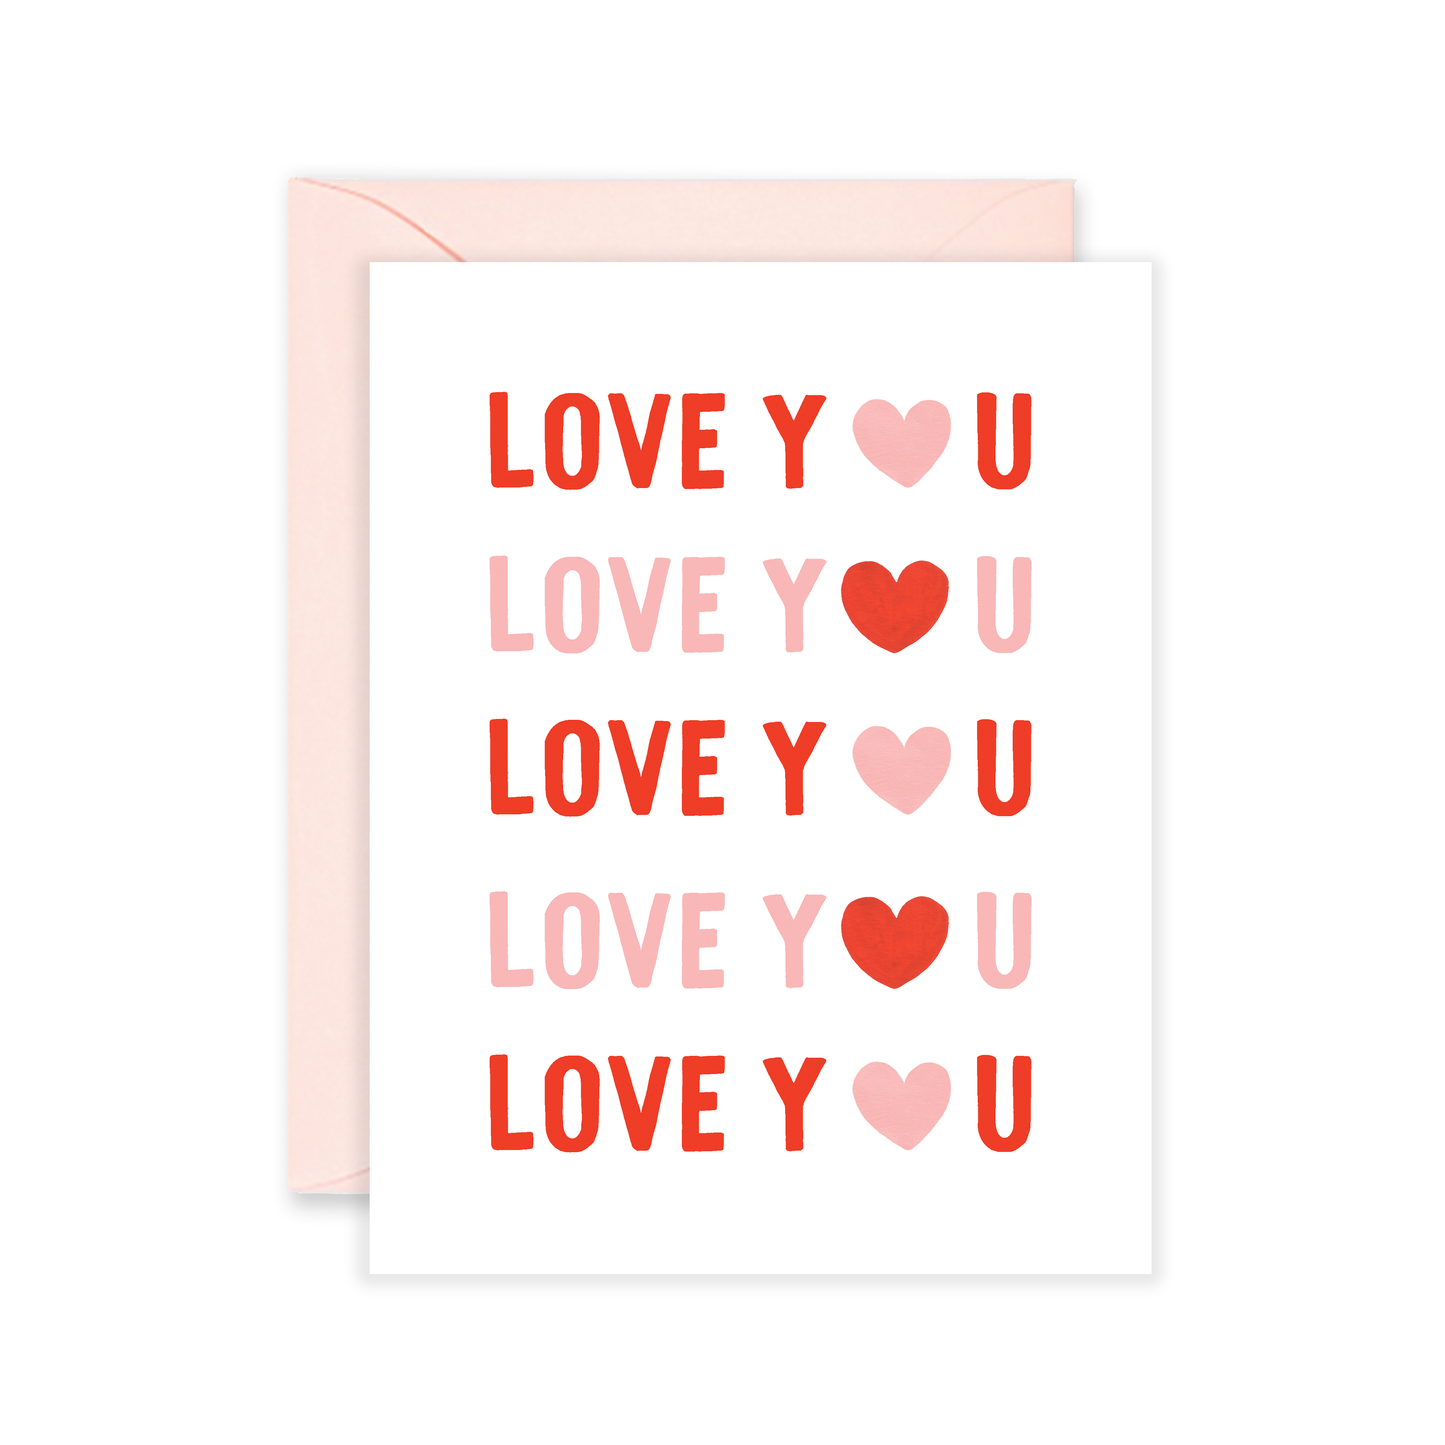 Love You Hearts Greeting Card